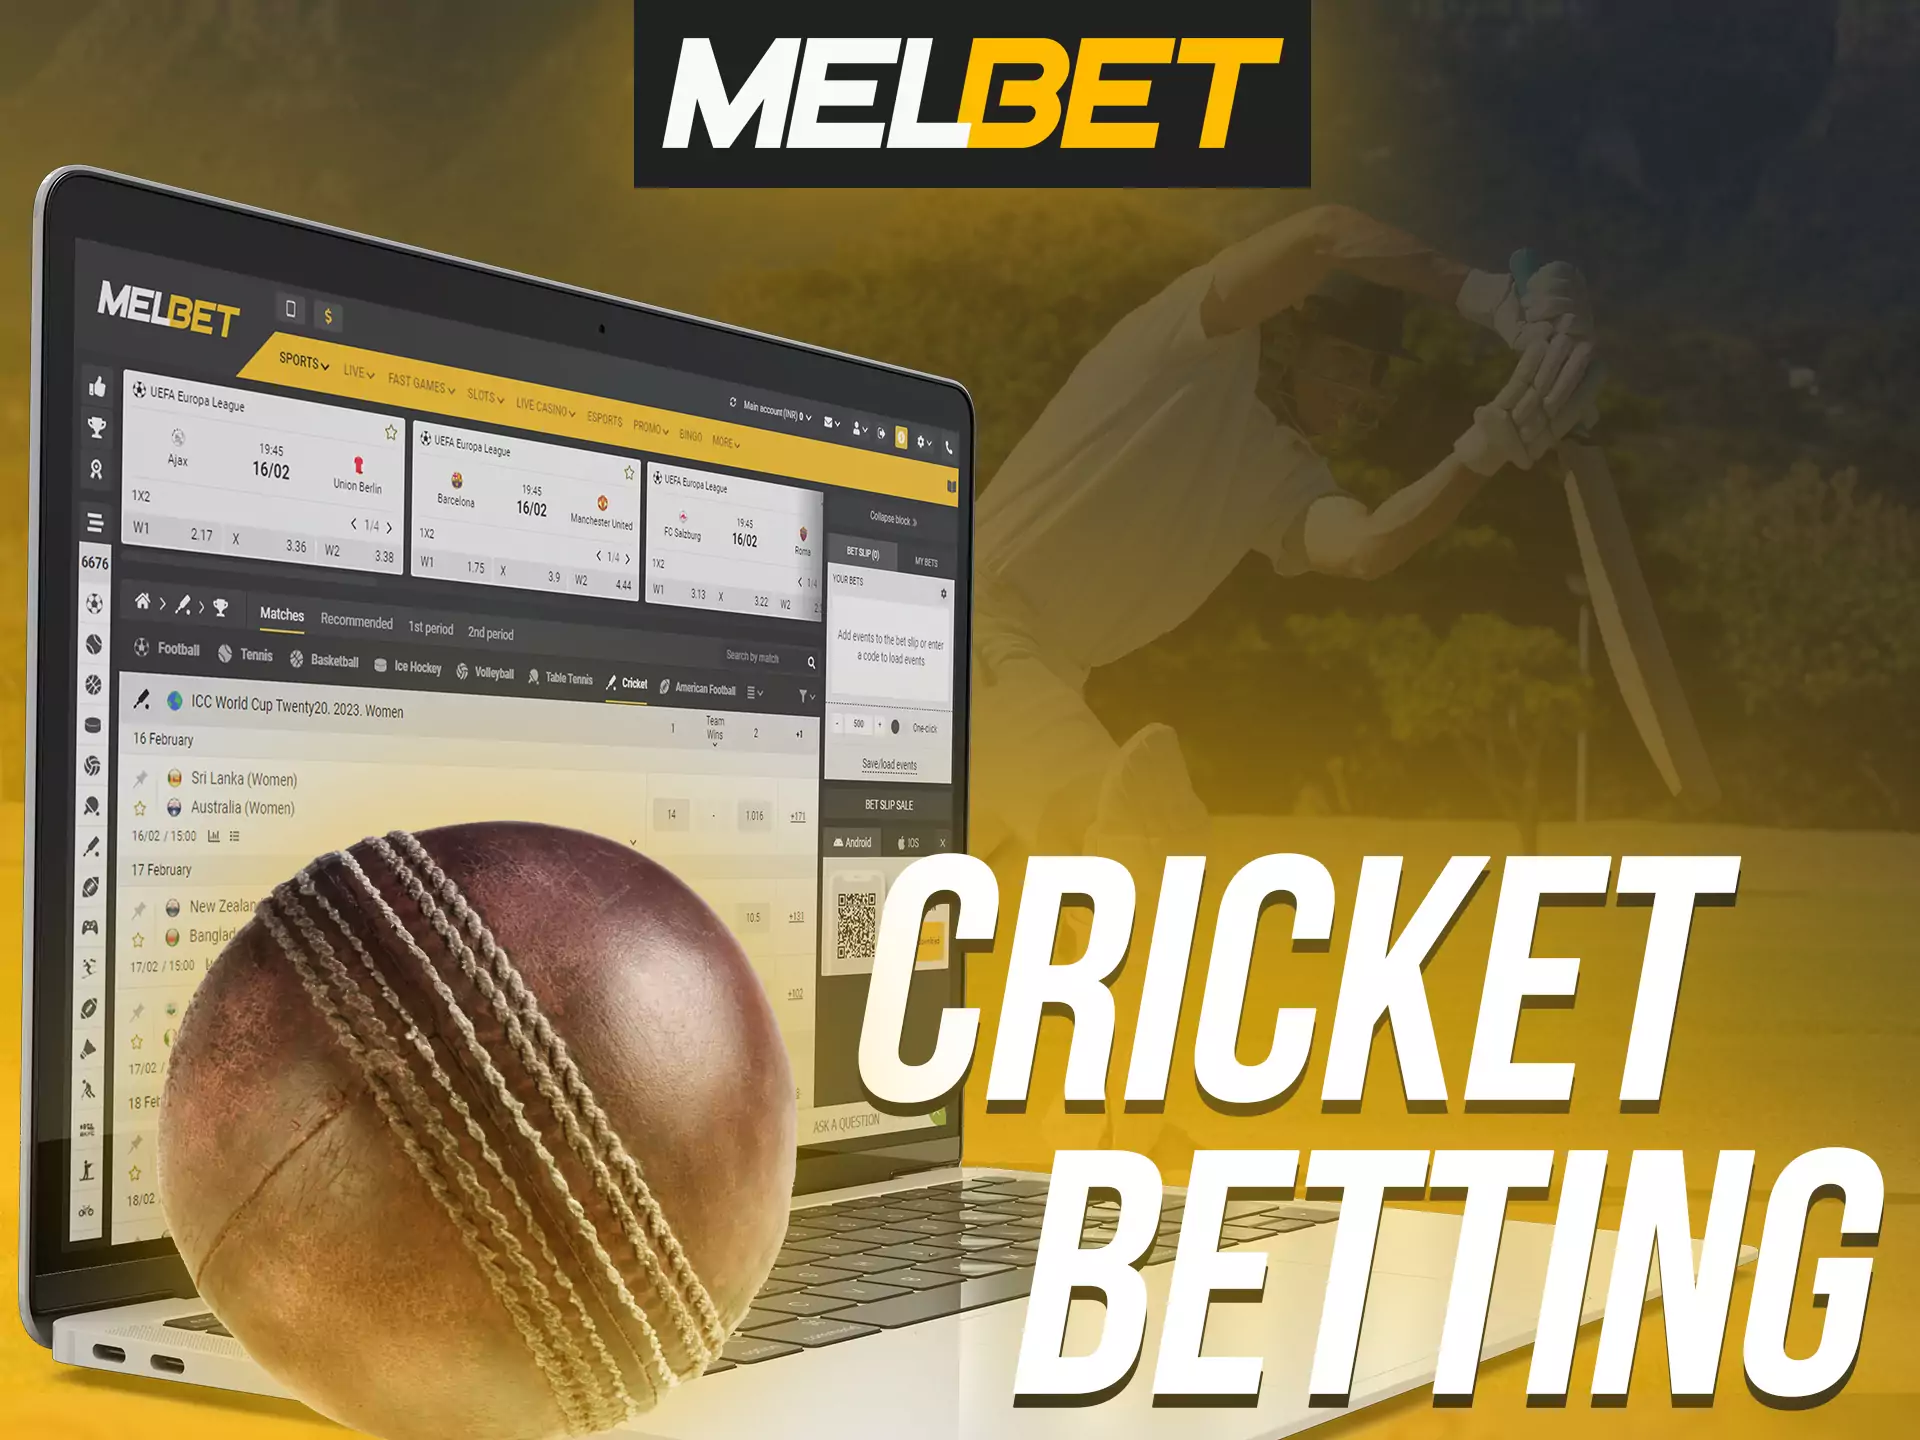 Win huge amount of money at Melbet by betting on cricket teams.